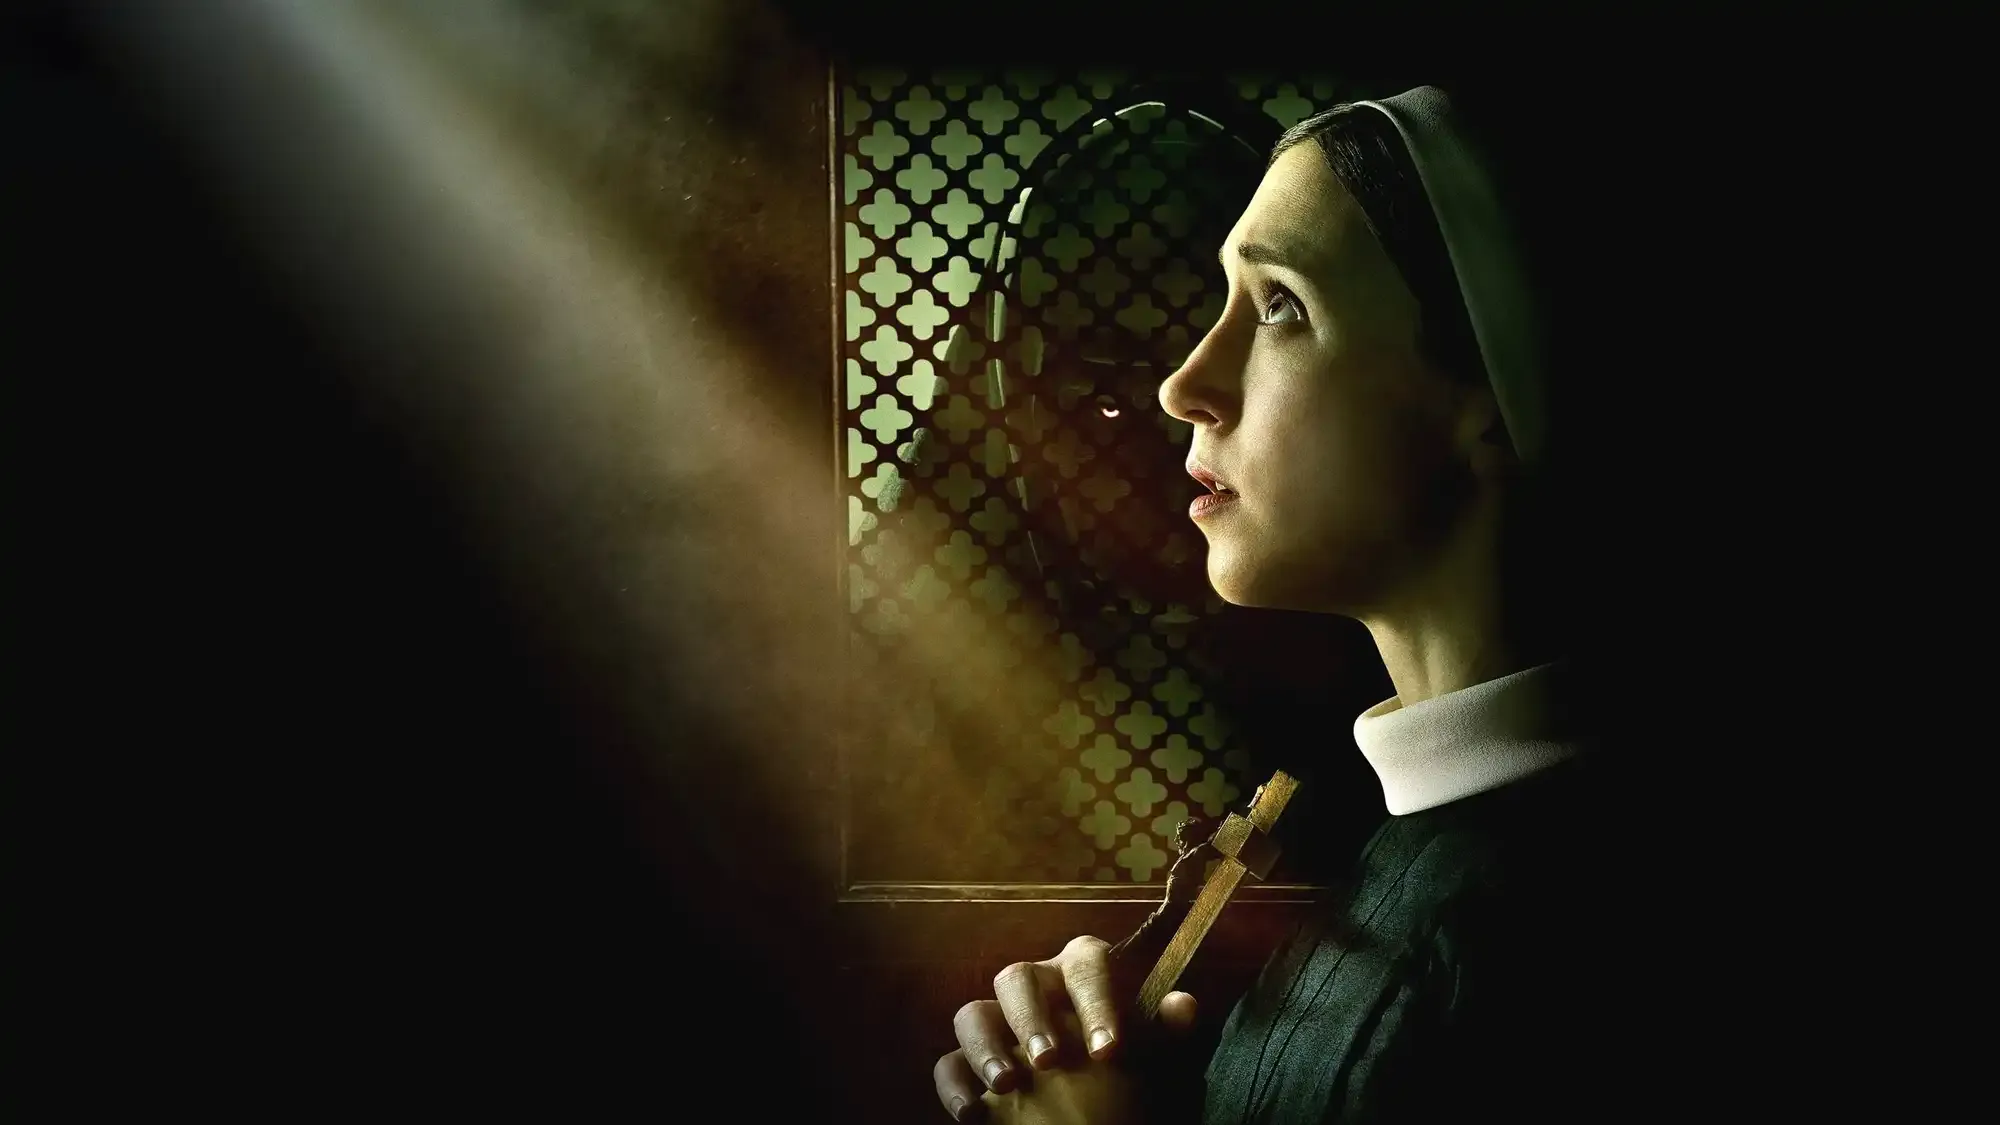 The Nun II movie review